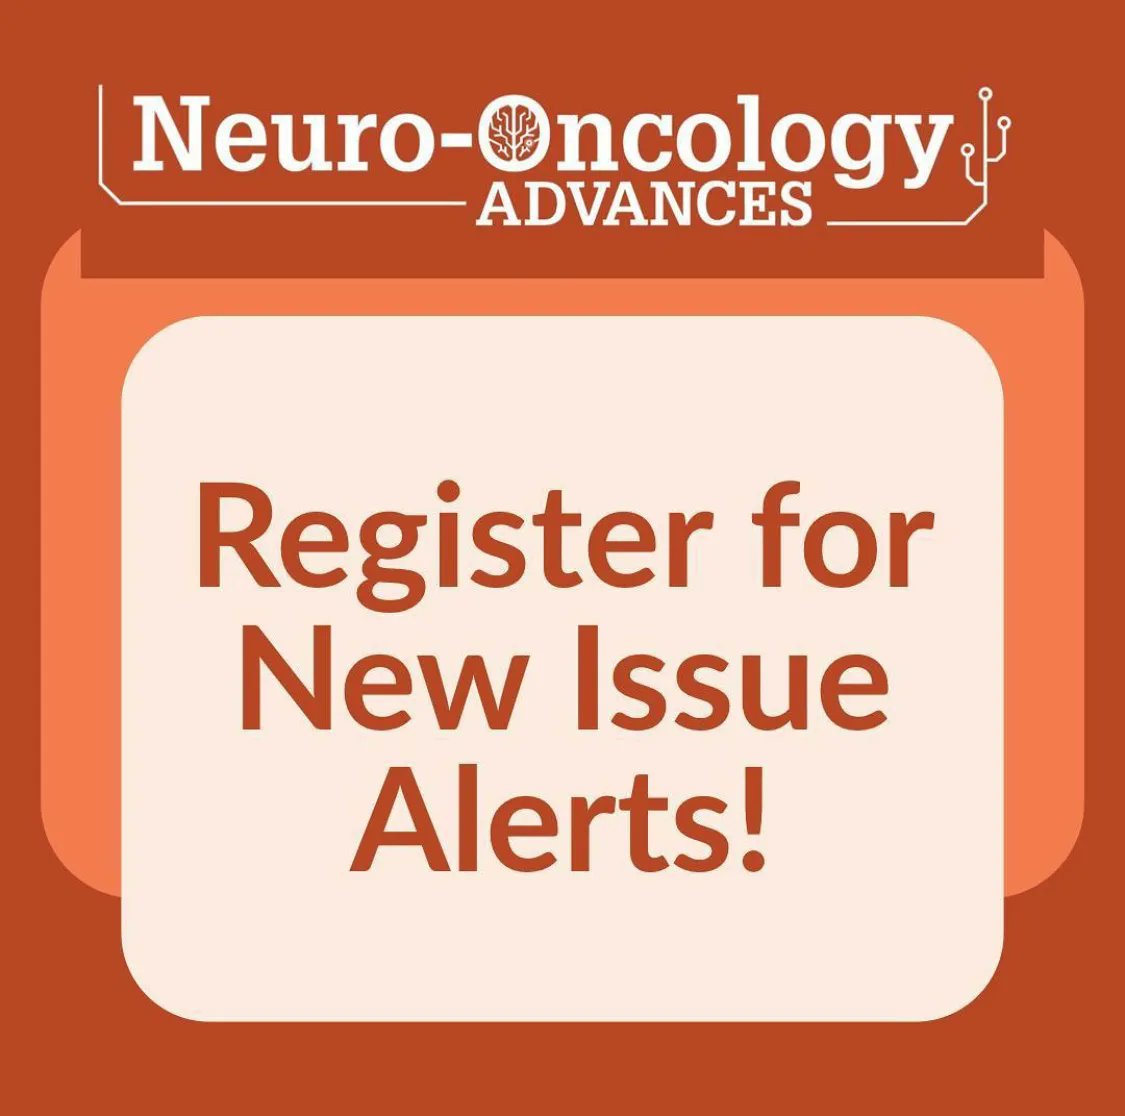 Never miss an issue of #NeuroOncology Advances - Register to receive alerts as soon as new issues are #published online! buff.ly/3xASVMd #Neurology #Oncology #MediccalJournal #Neurosurgery #CancerResearch #Glioblastoma